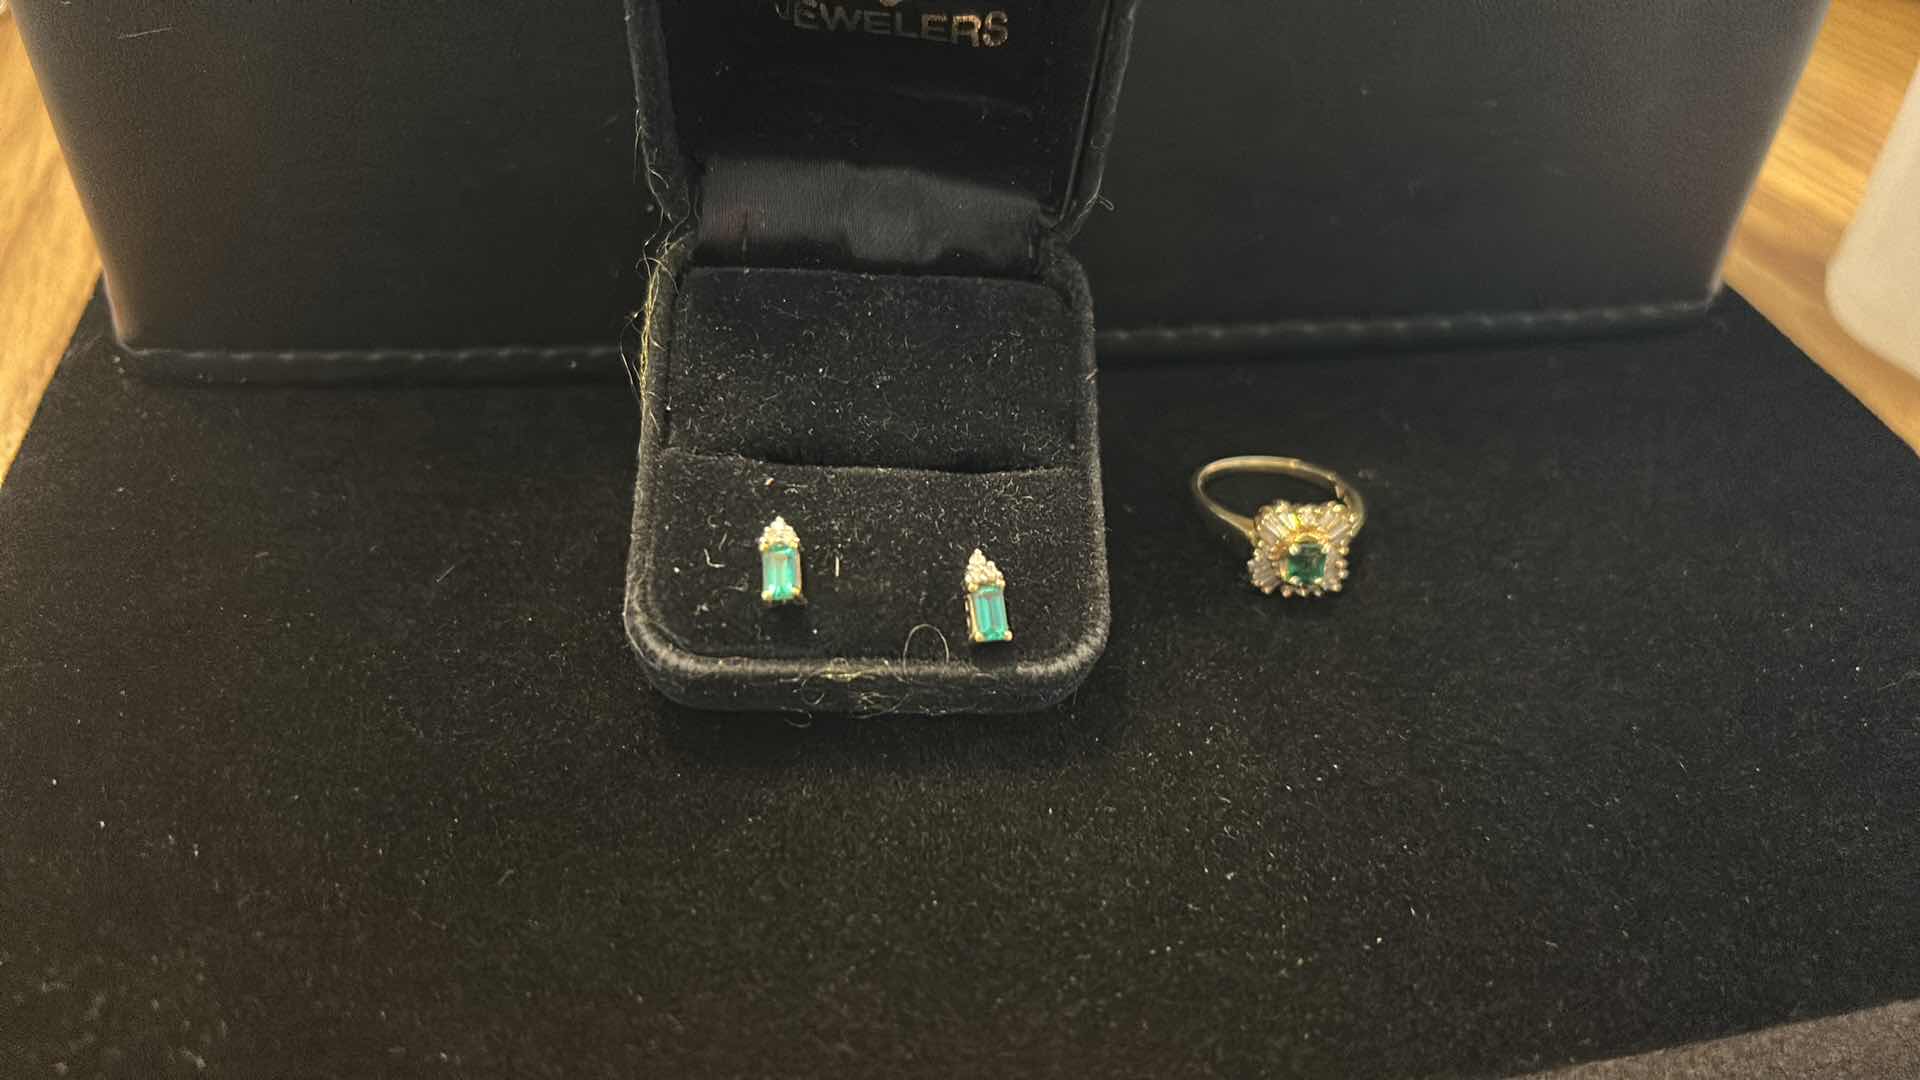 Photo 4 of FINE JEWELRY- 14K GOLD DIAMONDS WITH EMERALD, EARRINGS AND RING SET ESTIMATED  SIZE 5-6